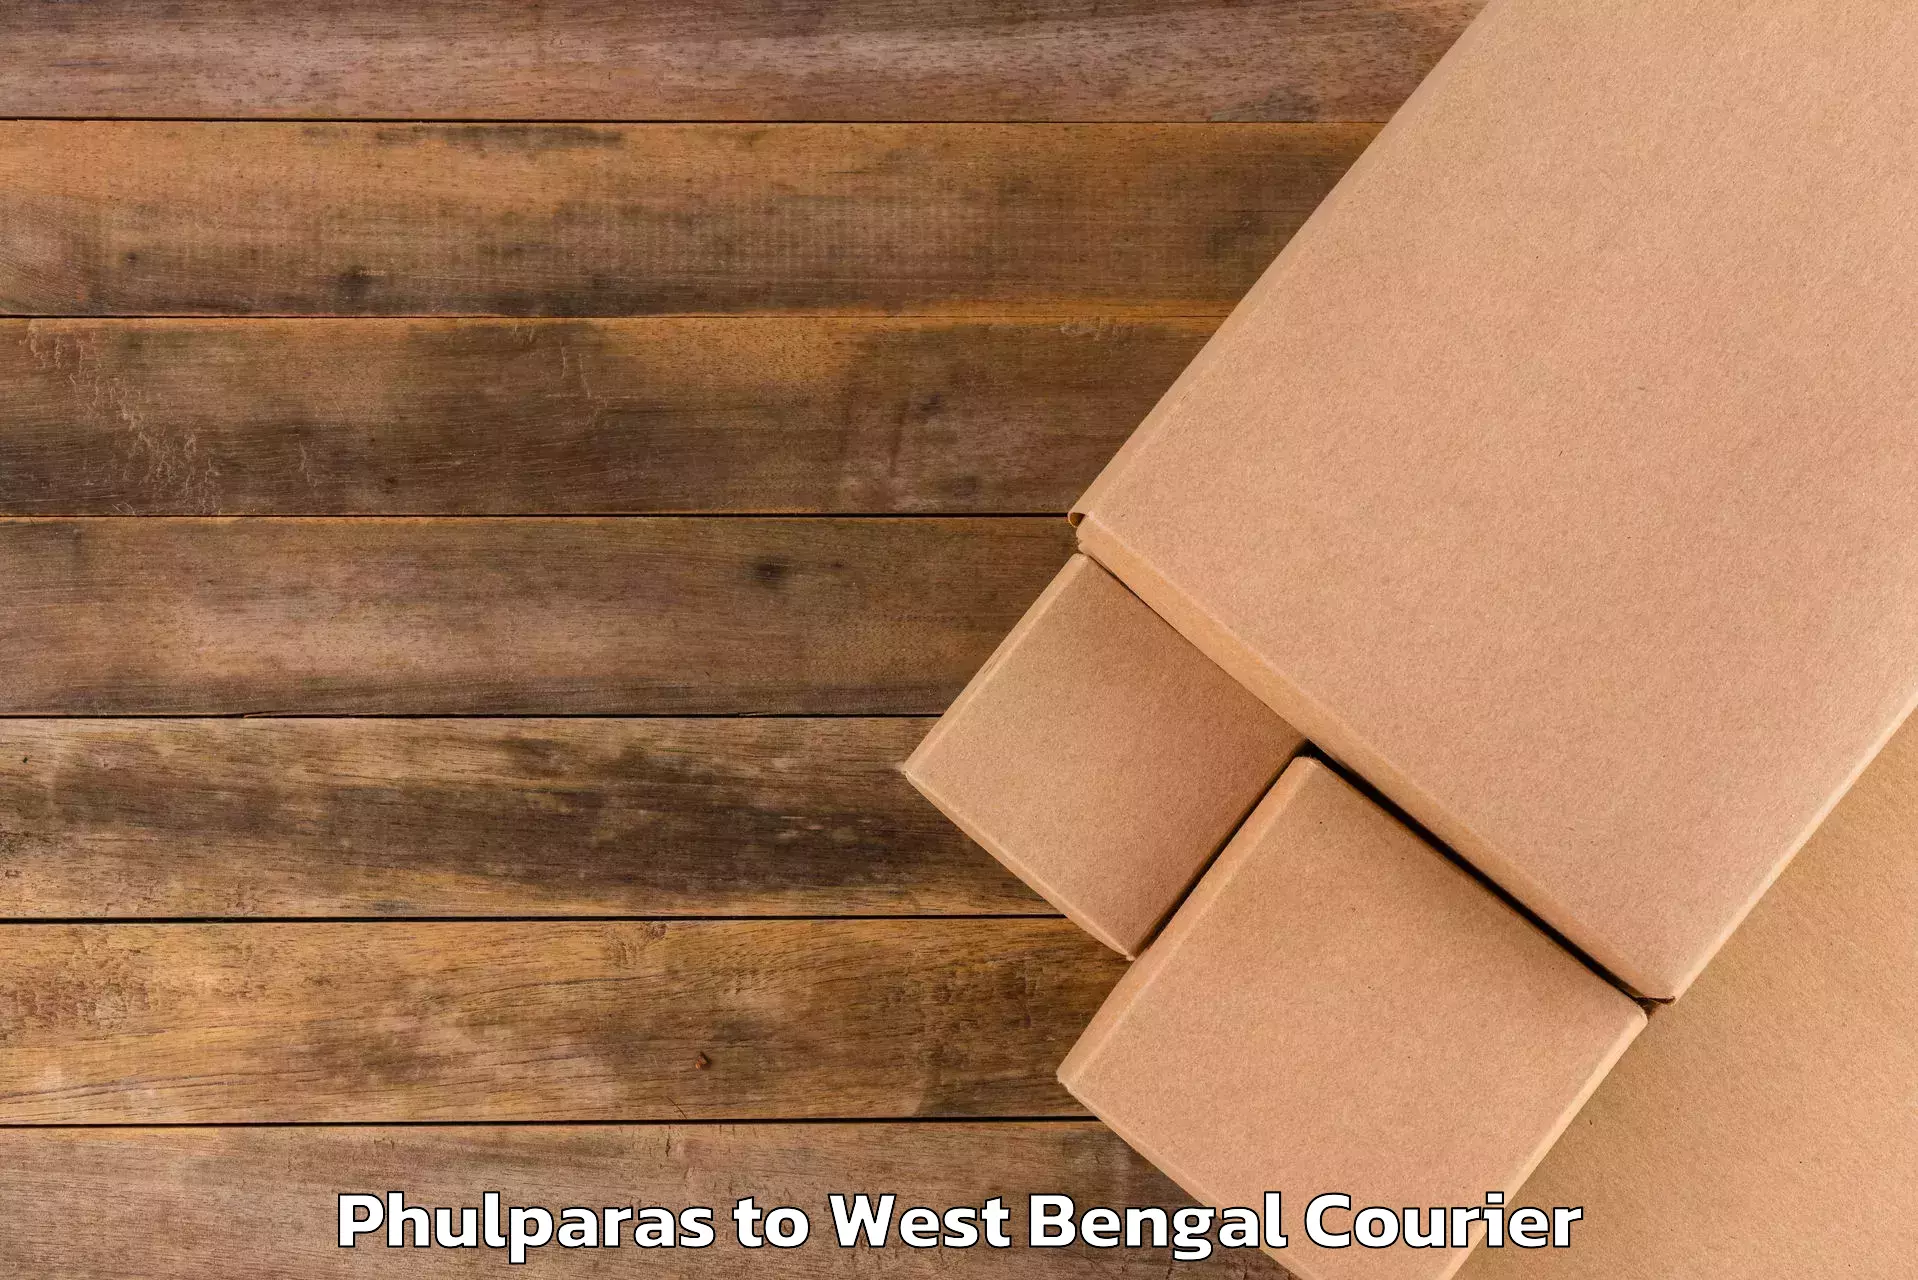 Personal effects shipping Phulparas to Haldia port